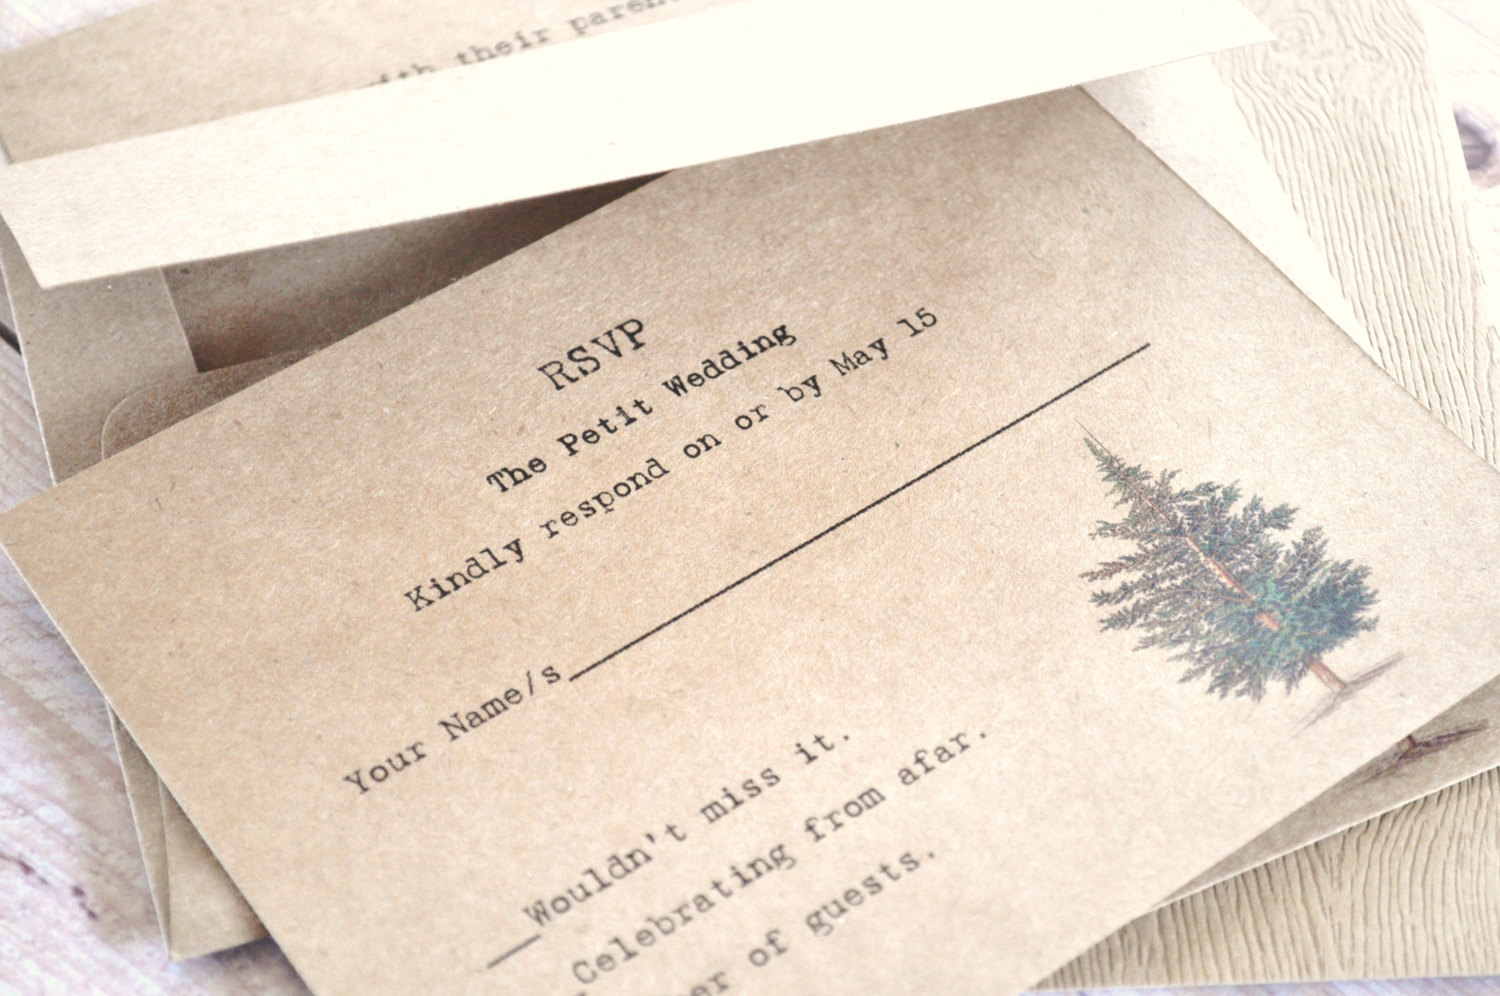 Rustic Tree Forest Wedding Invitations – created and sold by alittlemorerosie on Etsy